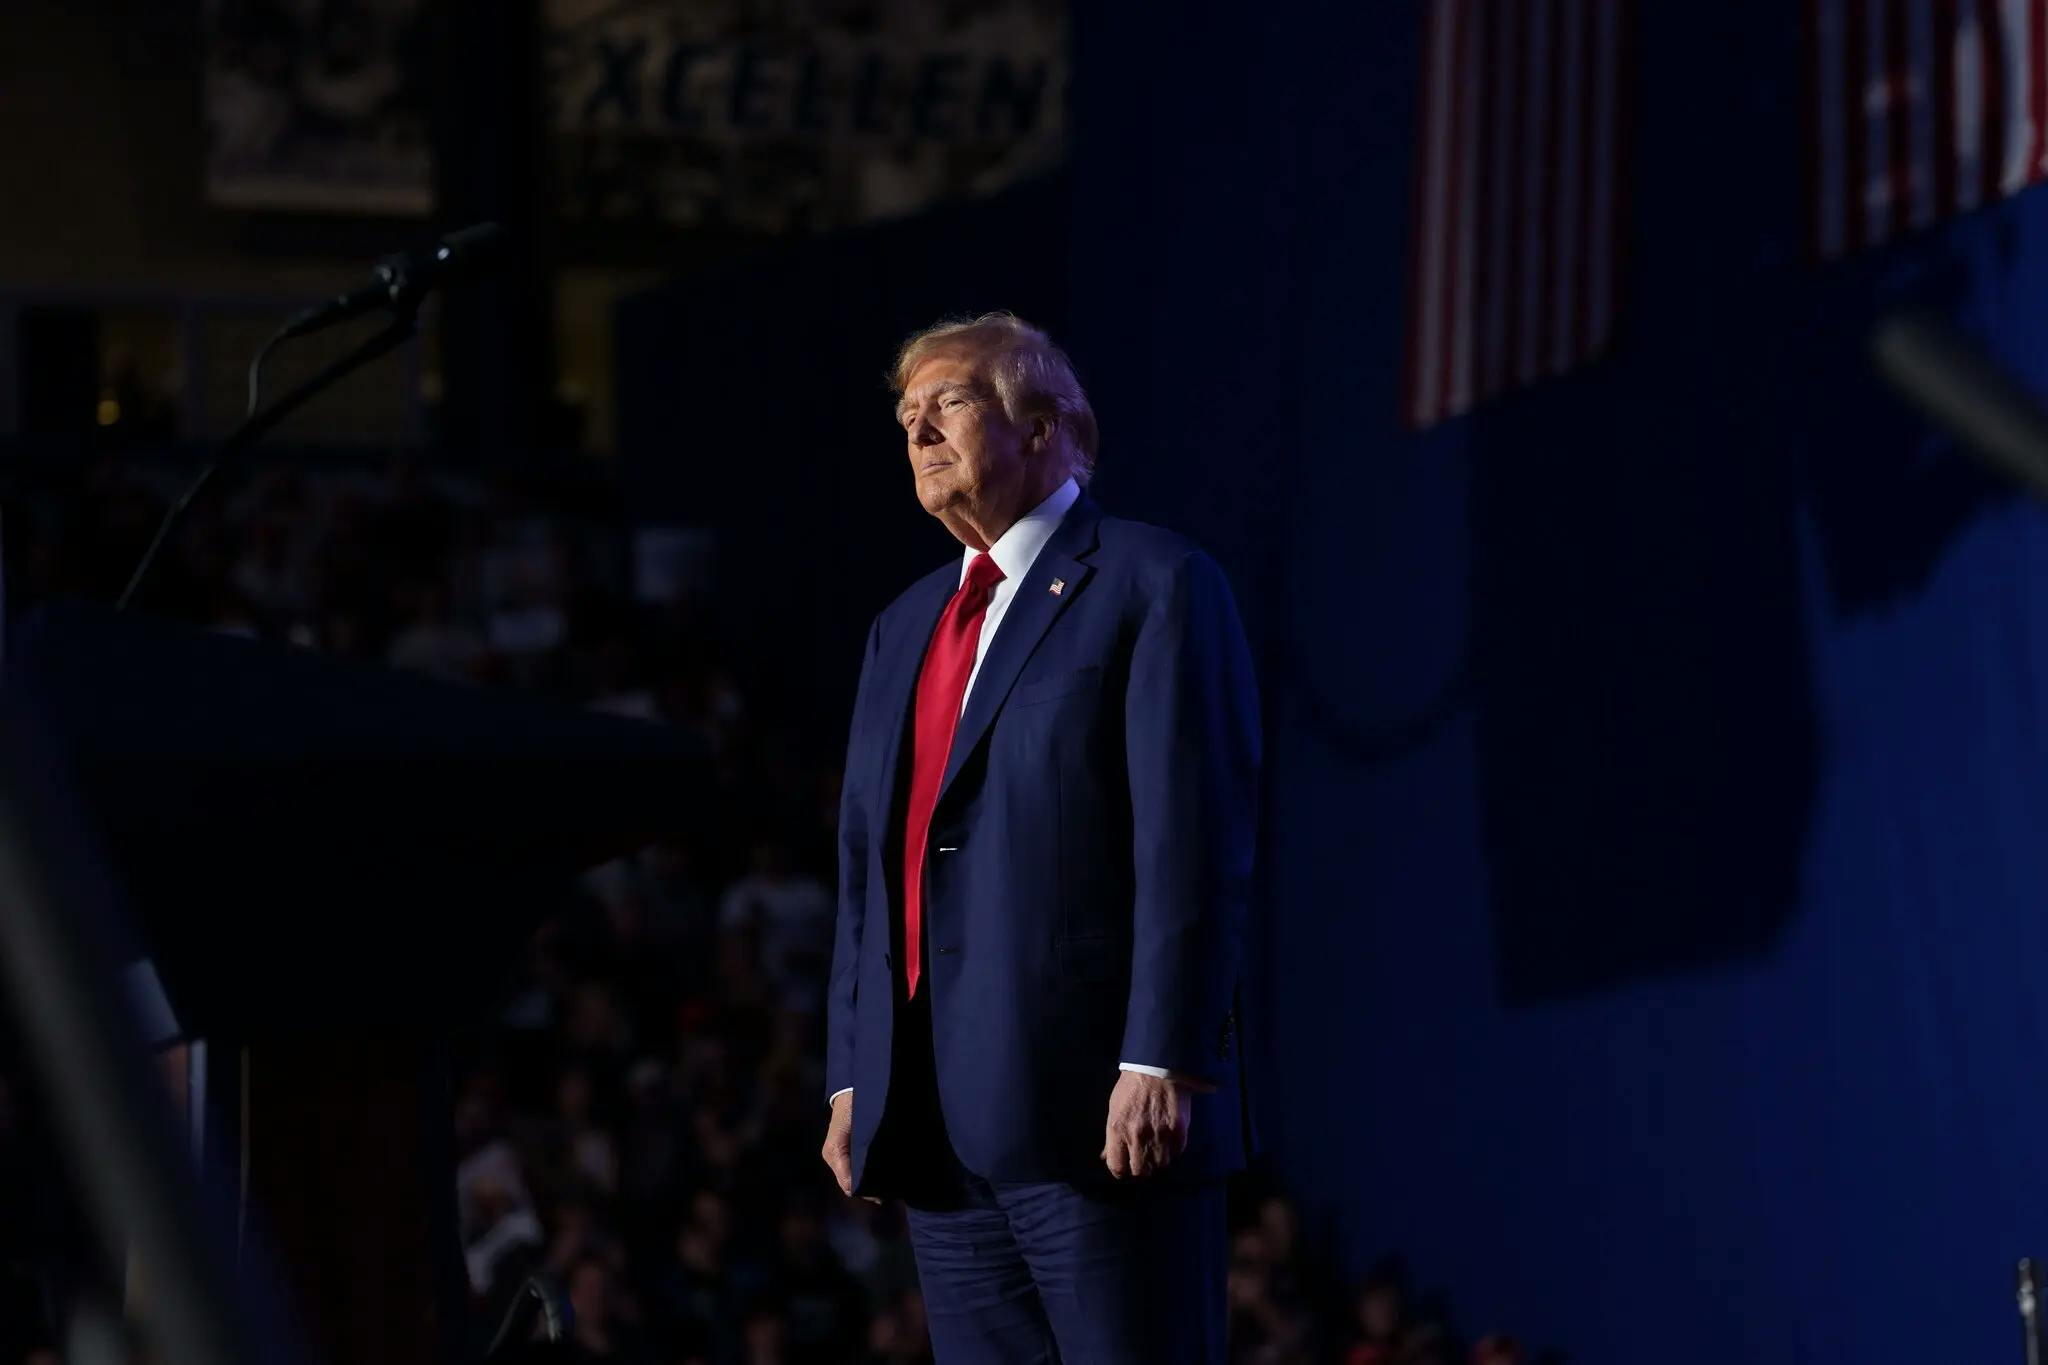 Donald Trump at a rally in New Hampshire